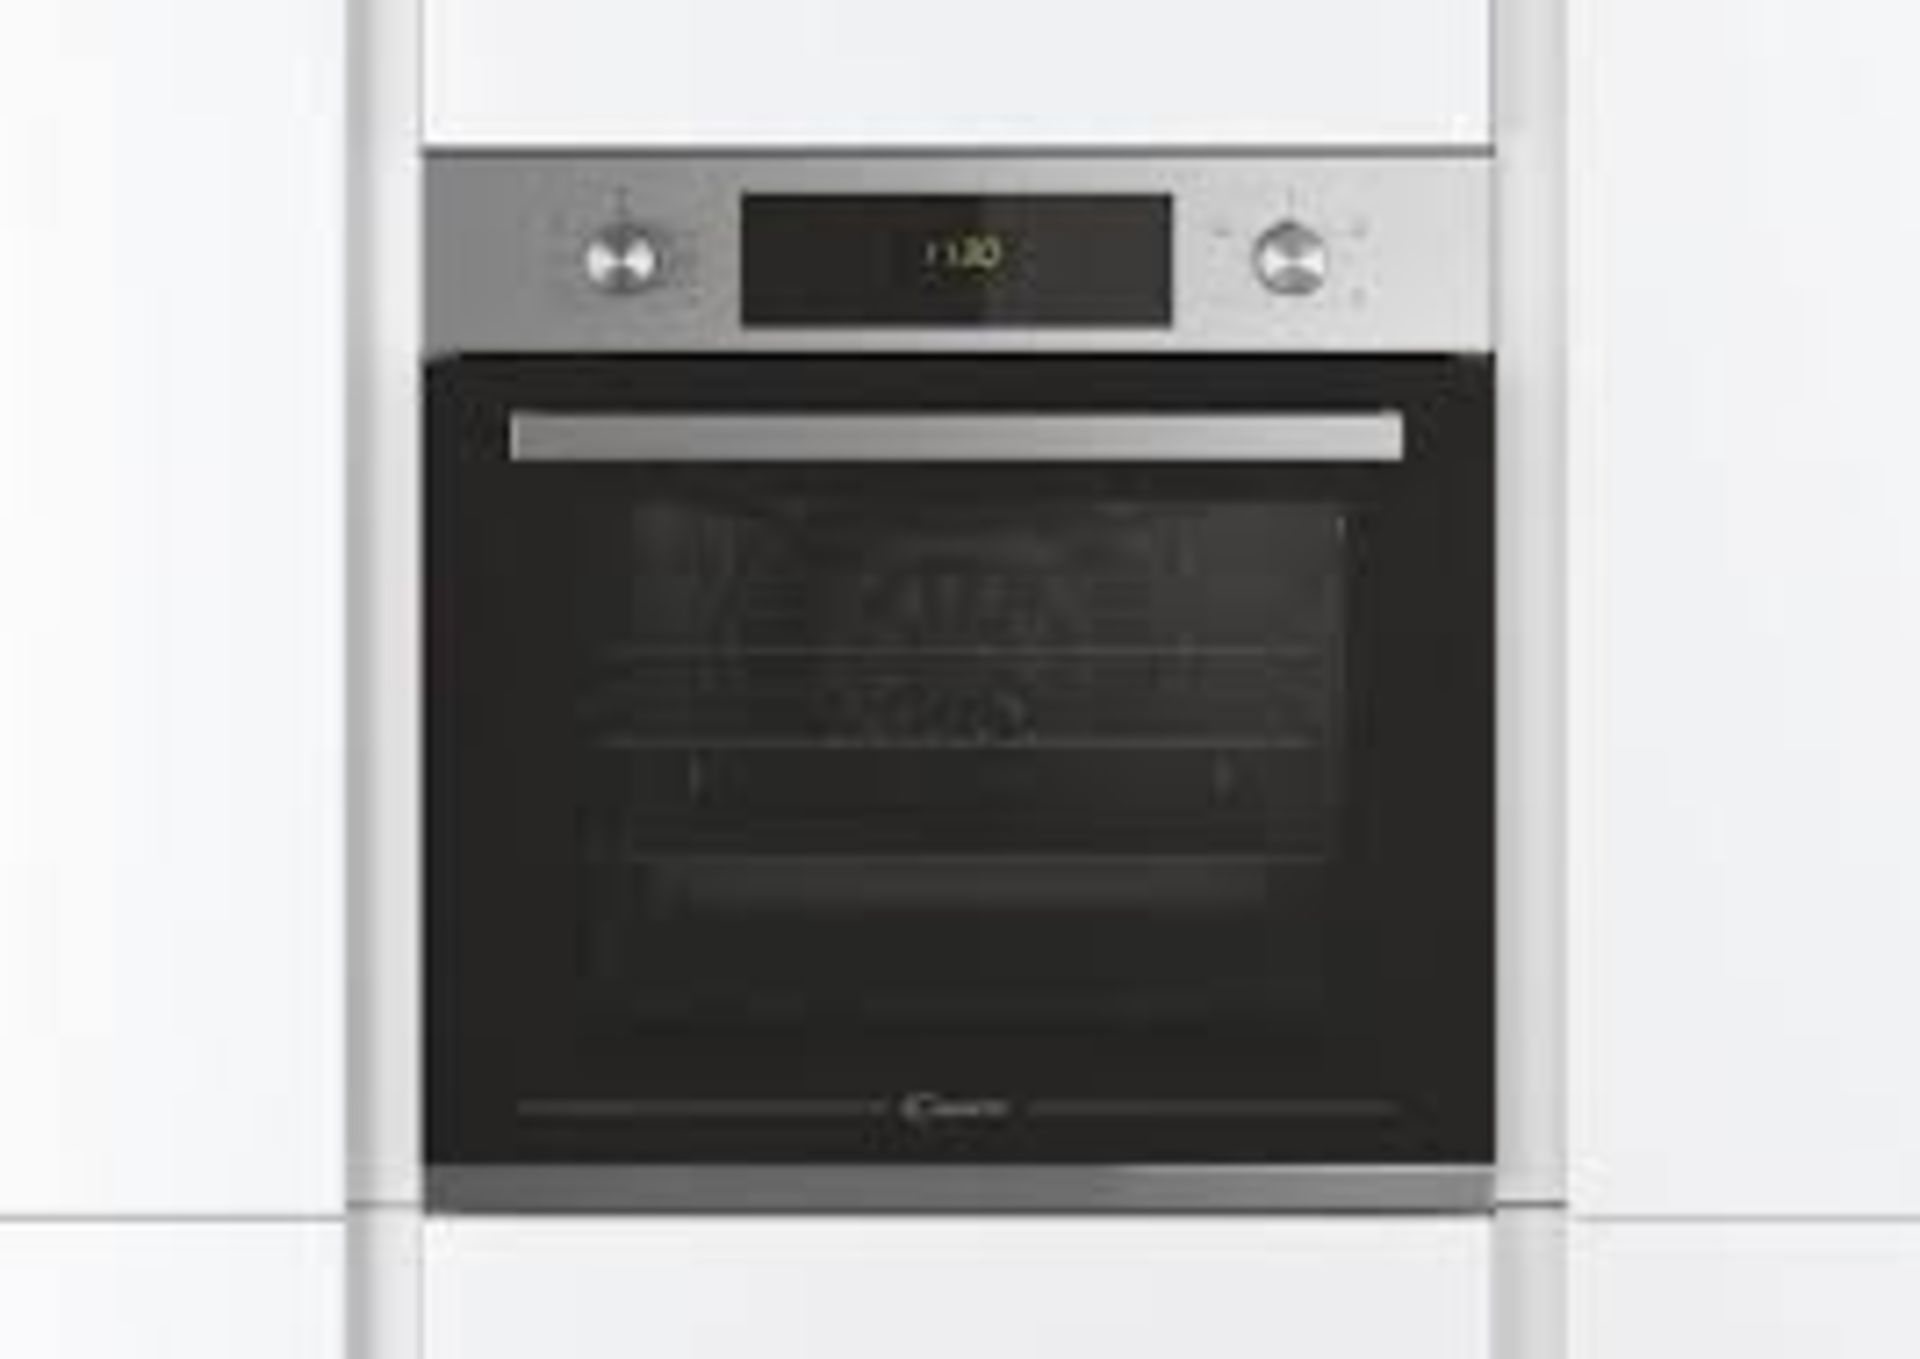 Candy FCT405X Single Electric Oven - Stainless Steel. -ER41. This Candy 60cm fan oven is ideal for